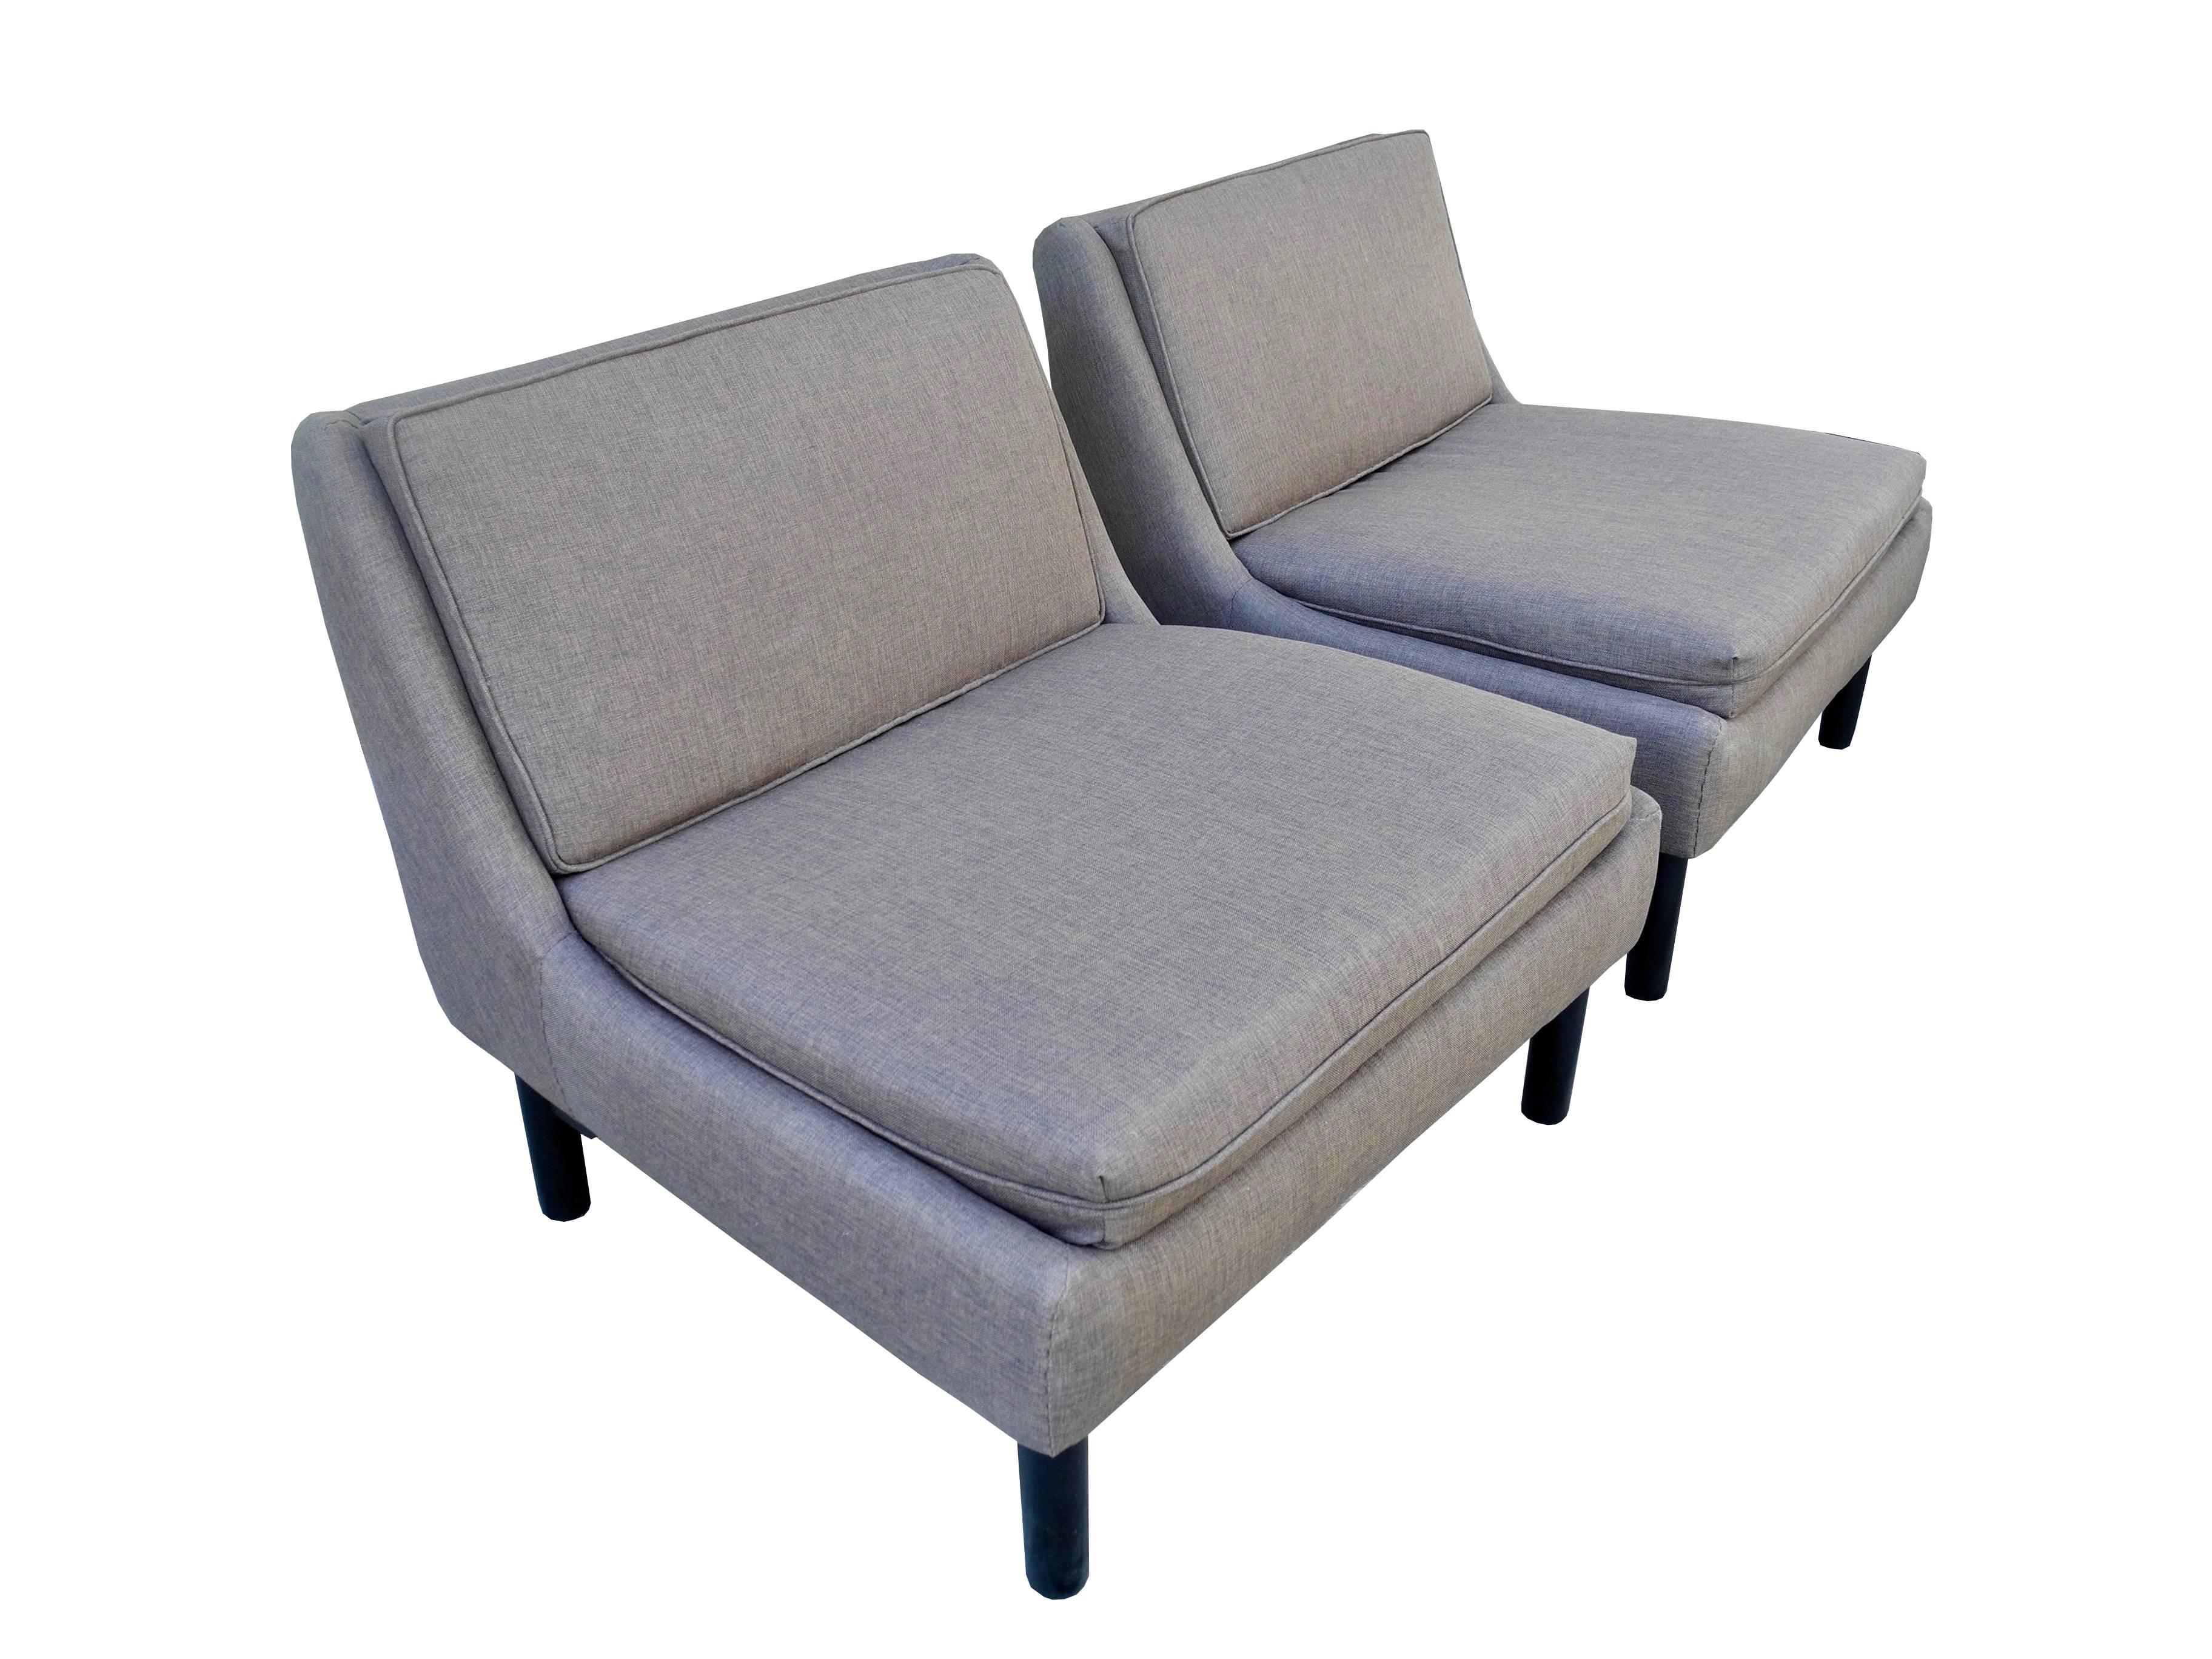 Pair of Mid-Century Modern Upholstered Linen Slipper Chairs by Widdicomb In Excellent Condition For Sale In Hudson, NY